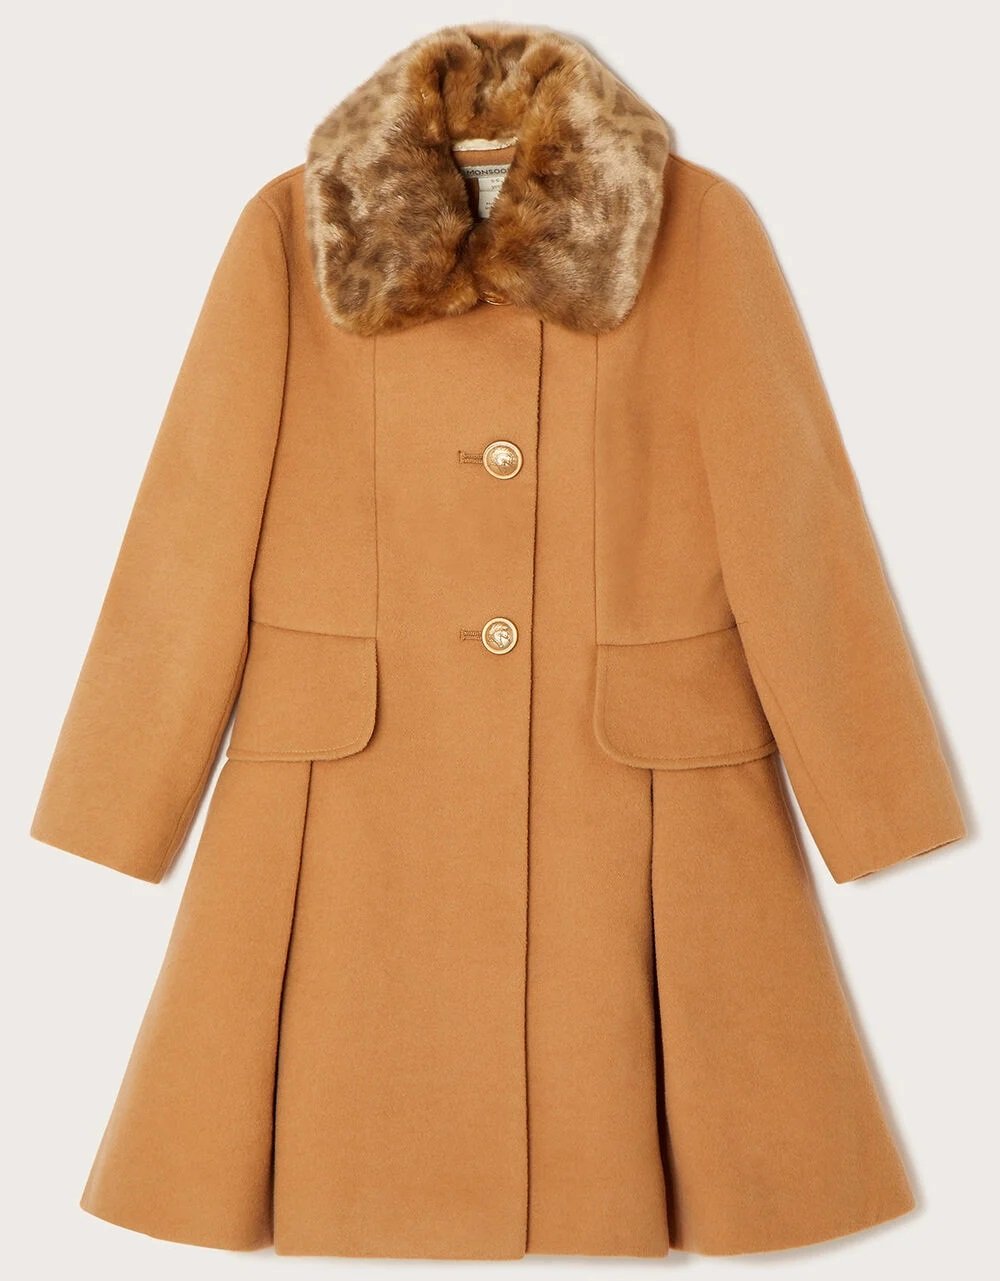 Monsoon Bustle Back Bow Coat with Faux Fur Collar in Camel.jpg